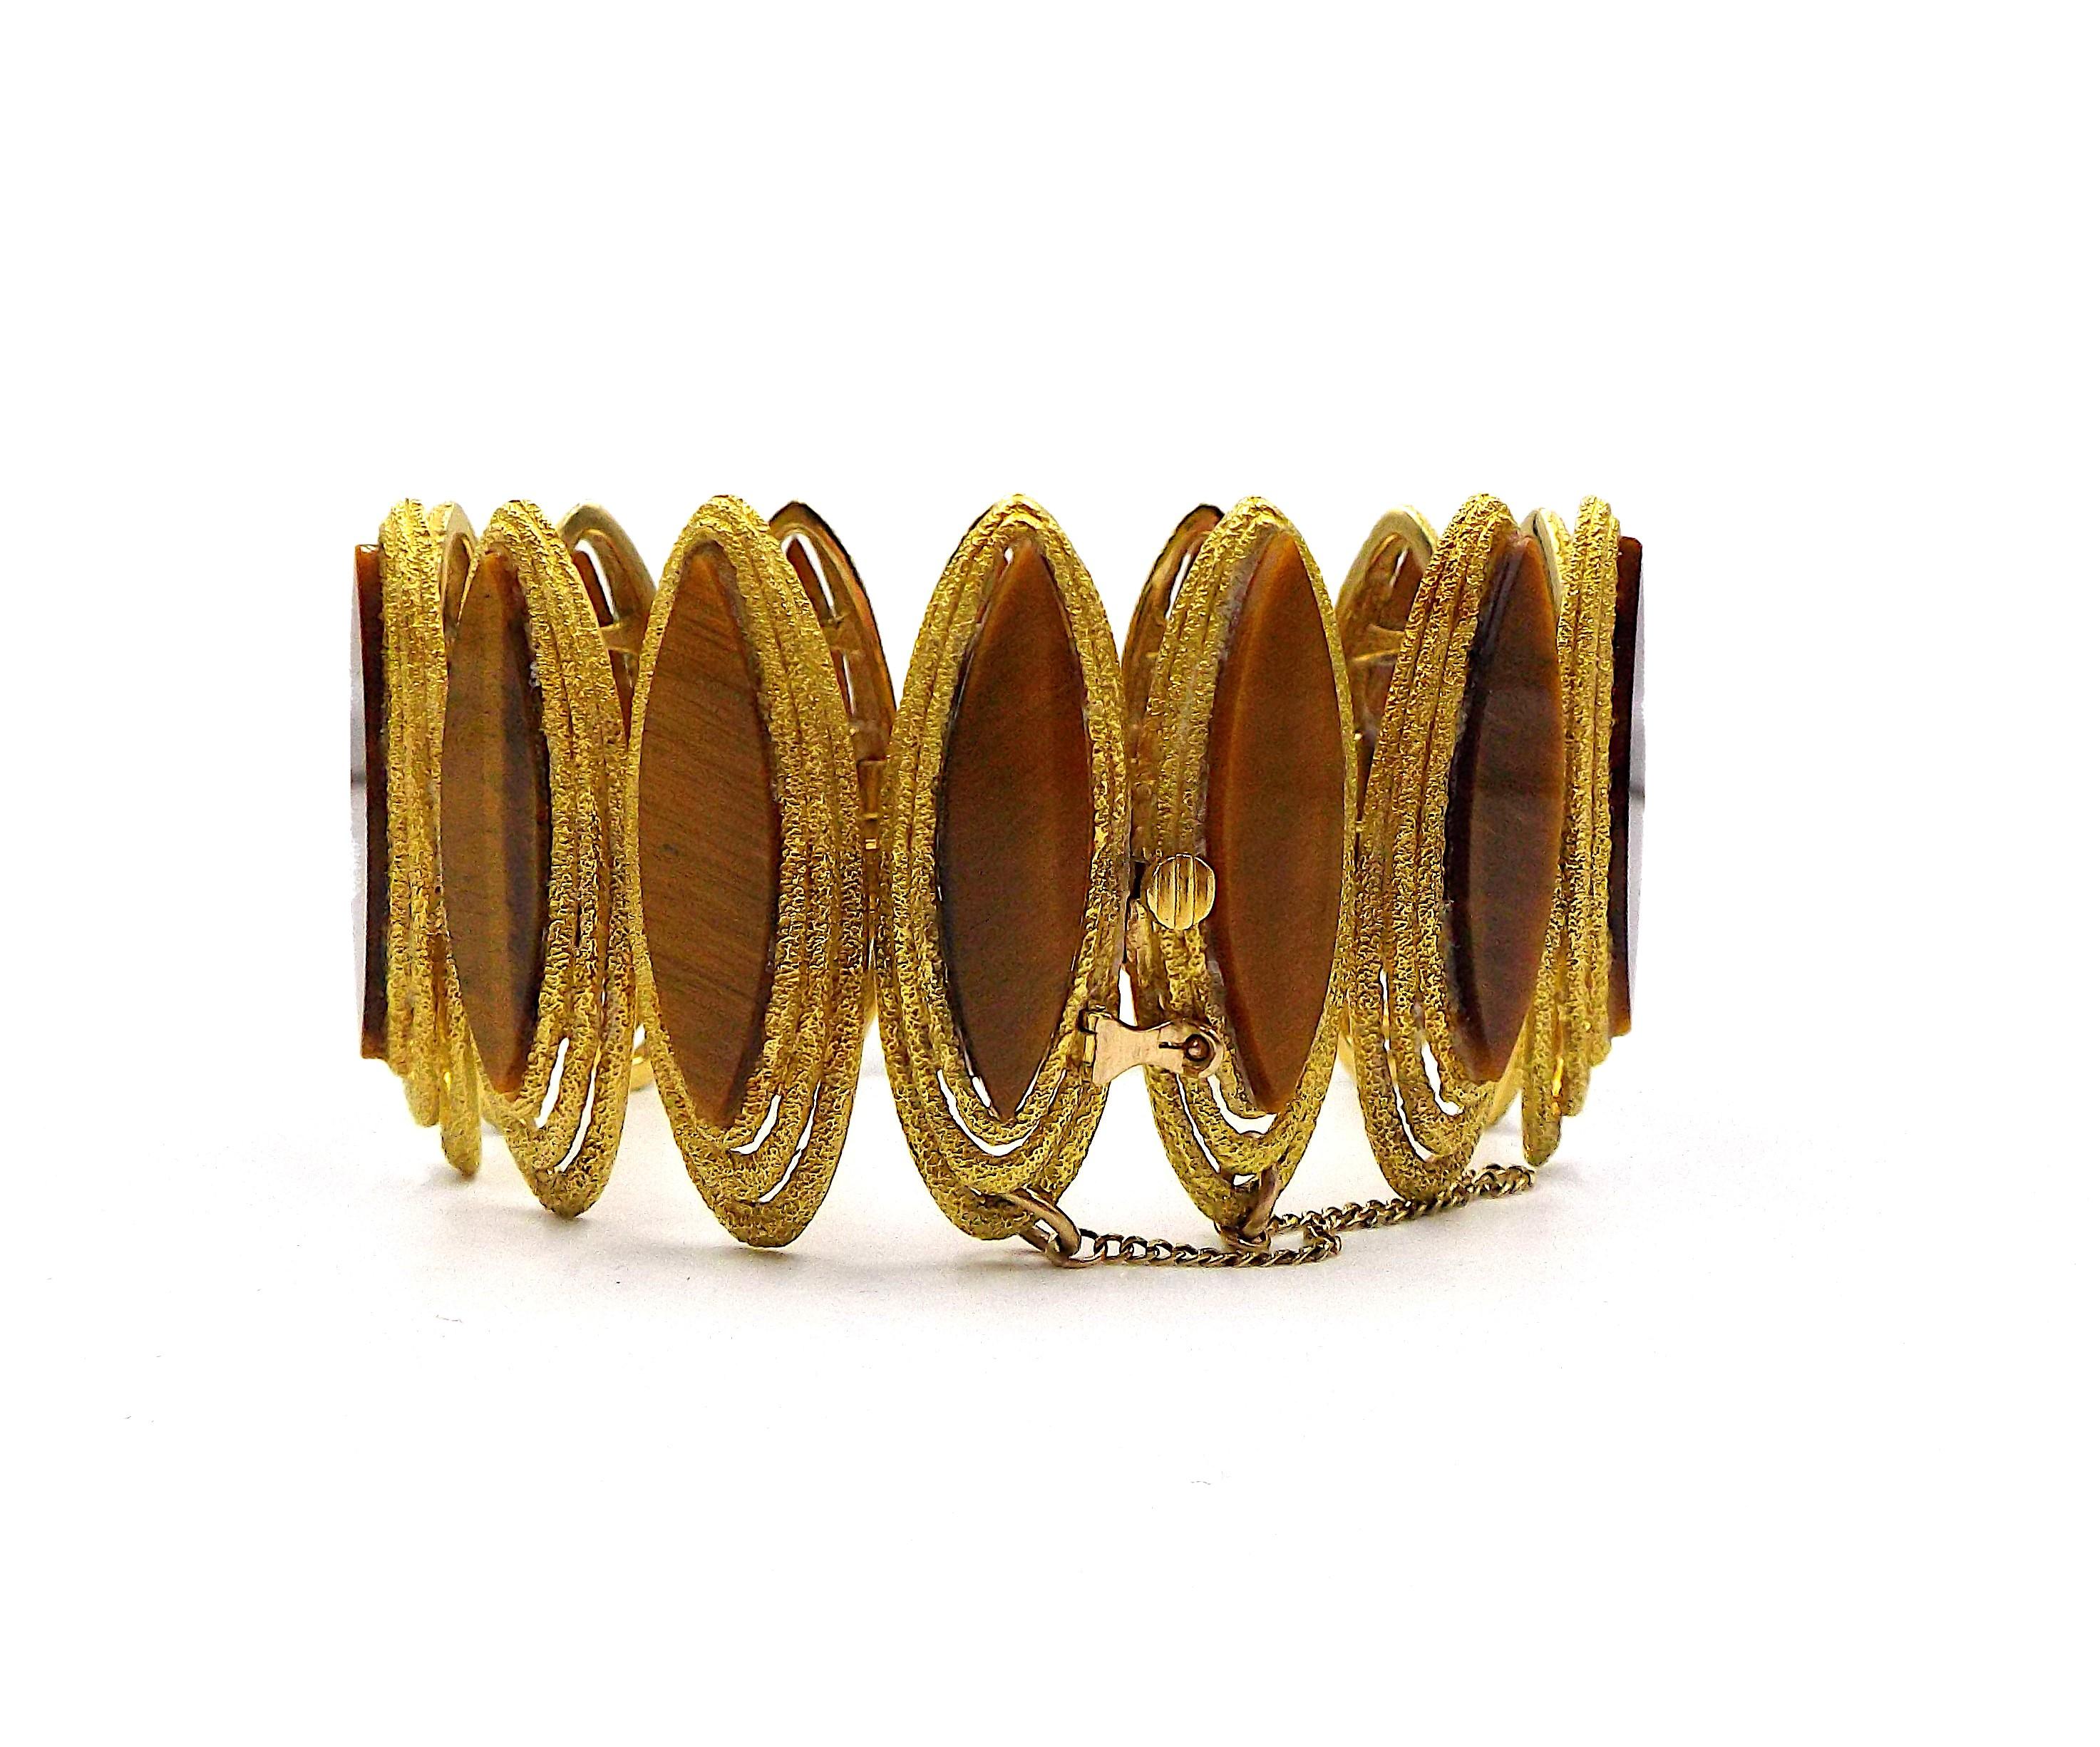 Of textured design, featuring elongated links inlayed with marquise-shaped tiger's eye quartz; set in 18k gold; internal circumference: 6 3/4 in.; signed Kutchinsky, numbered, with English hallmarks